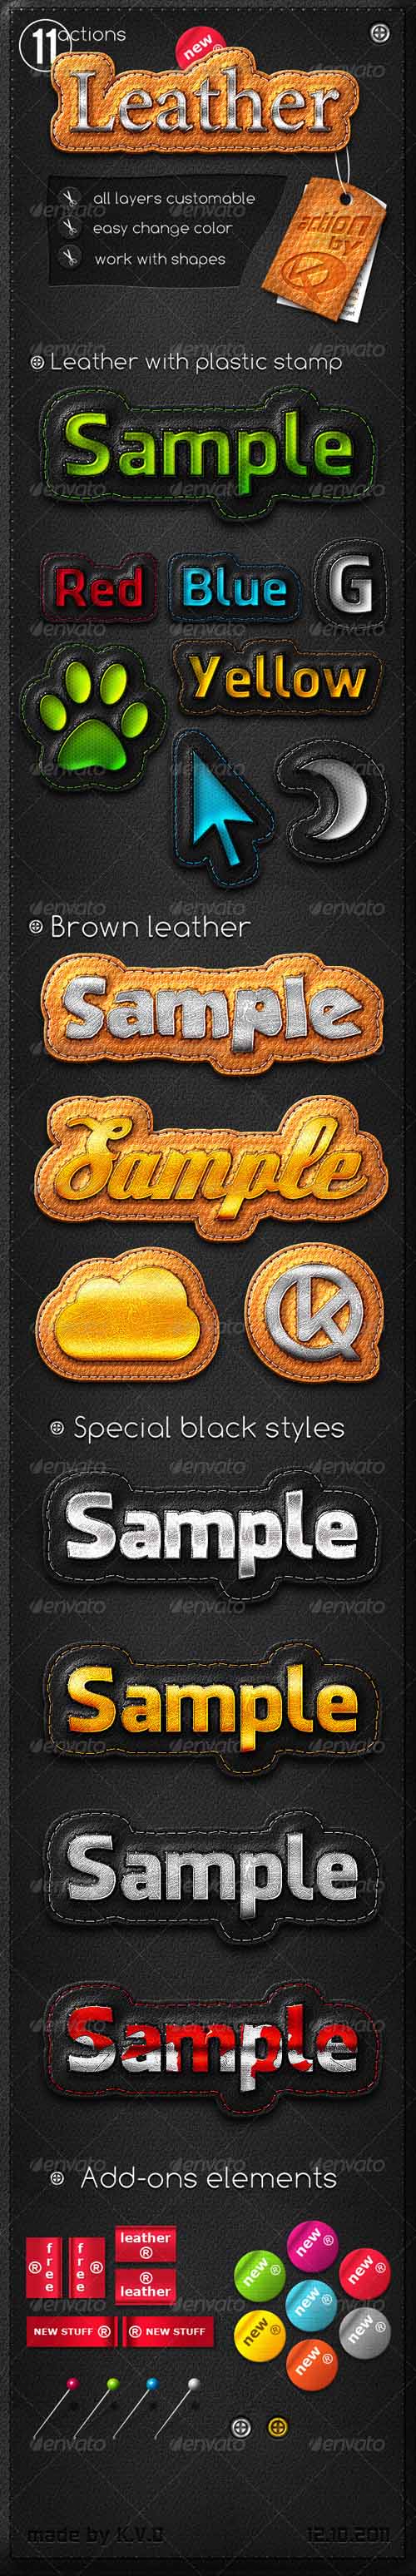 Graphicriver: Leather Stripe Actions